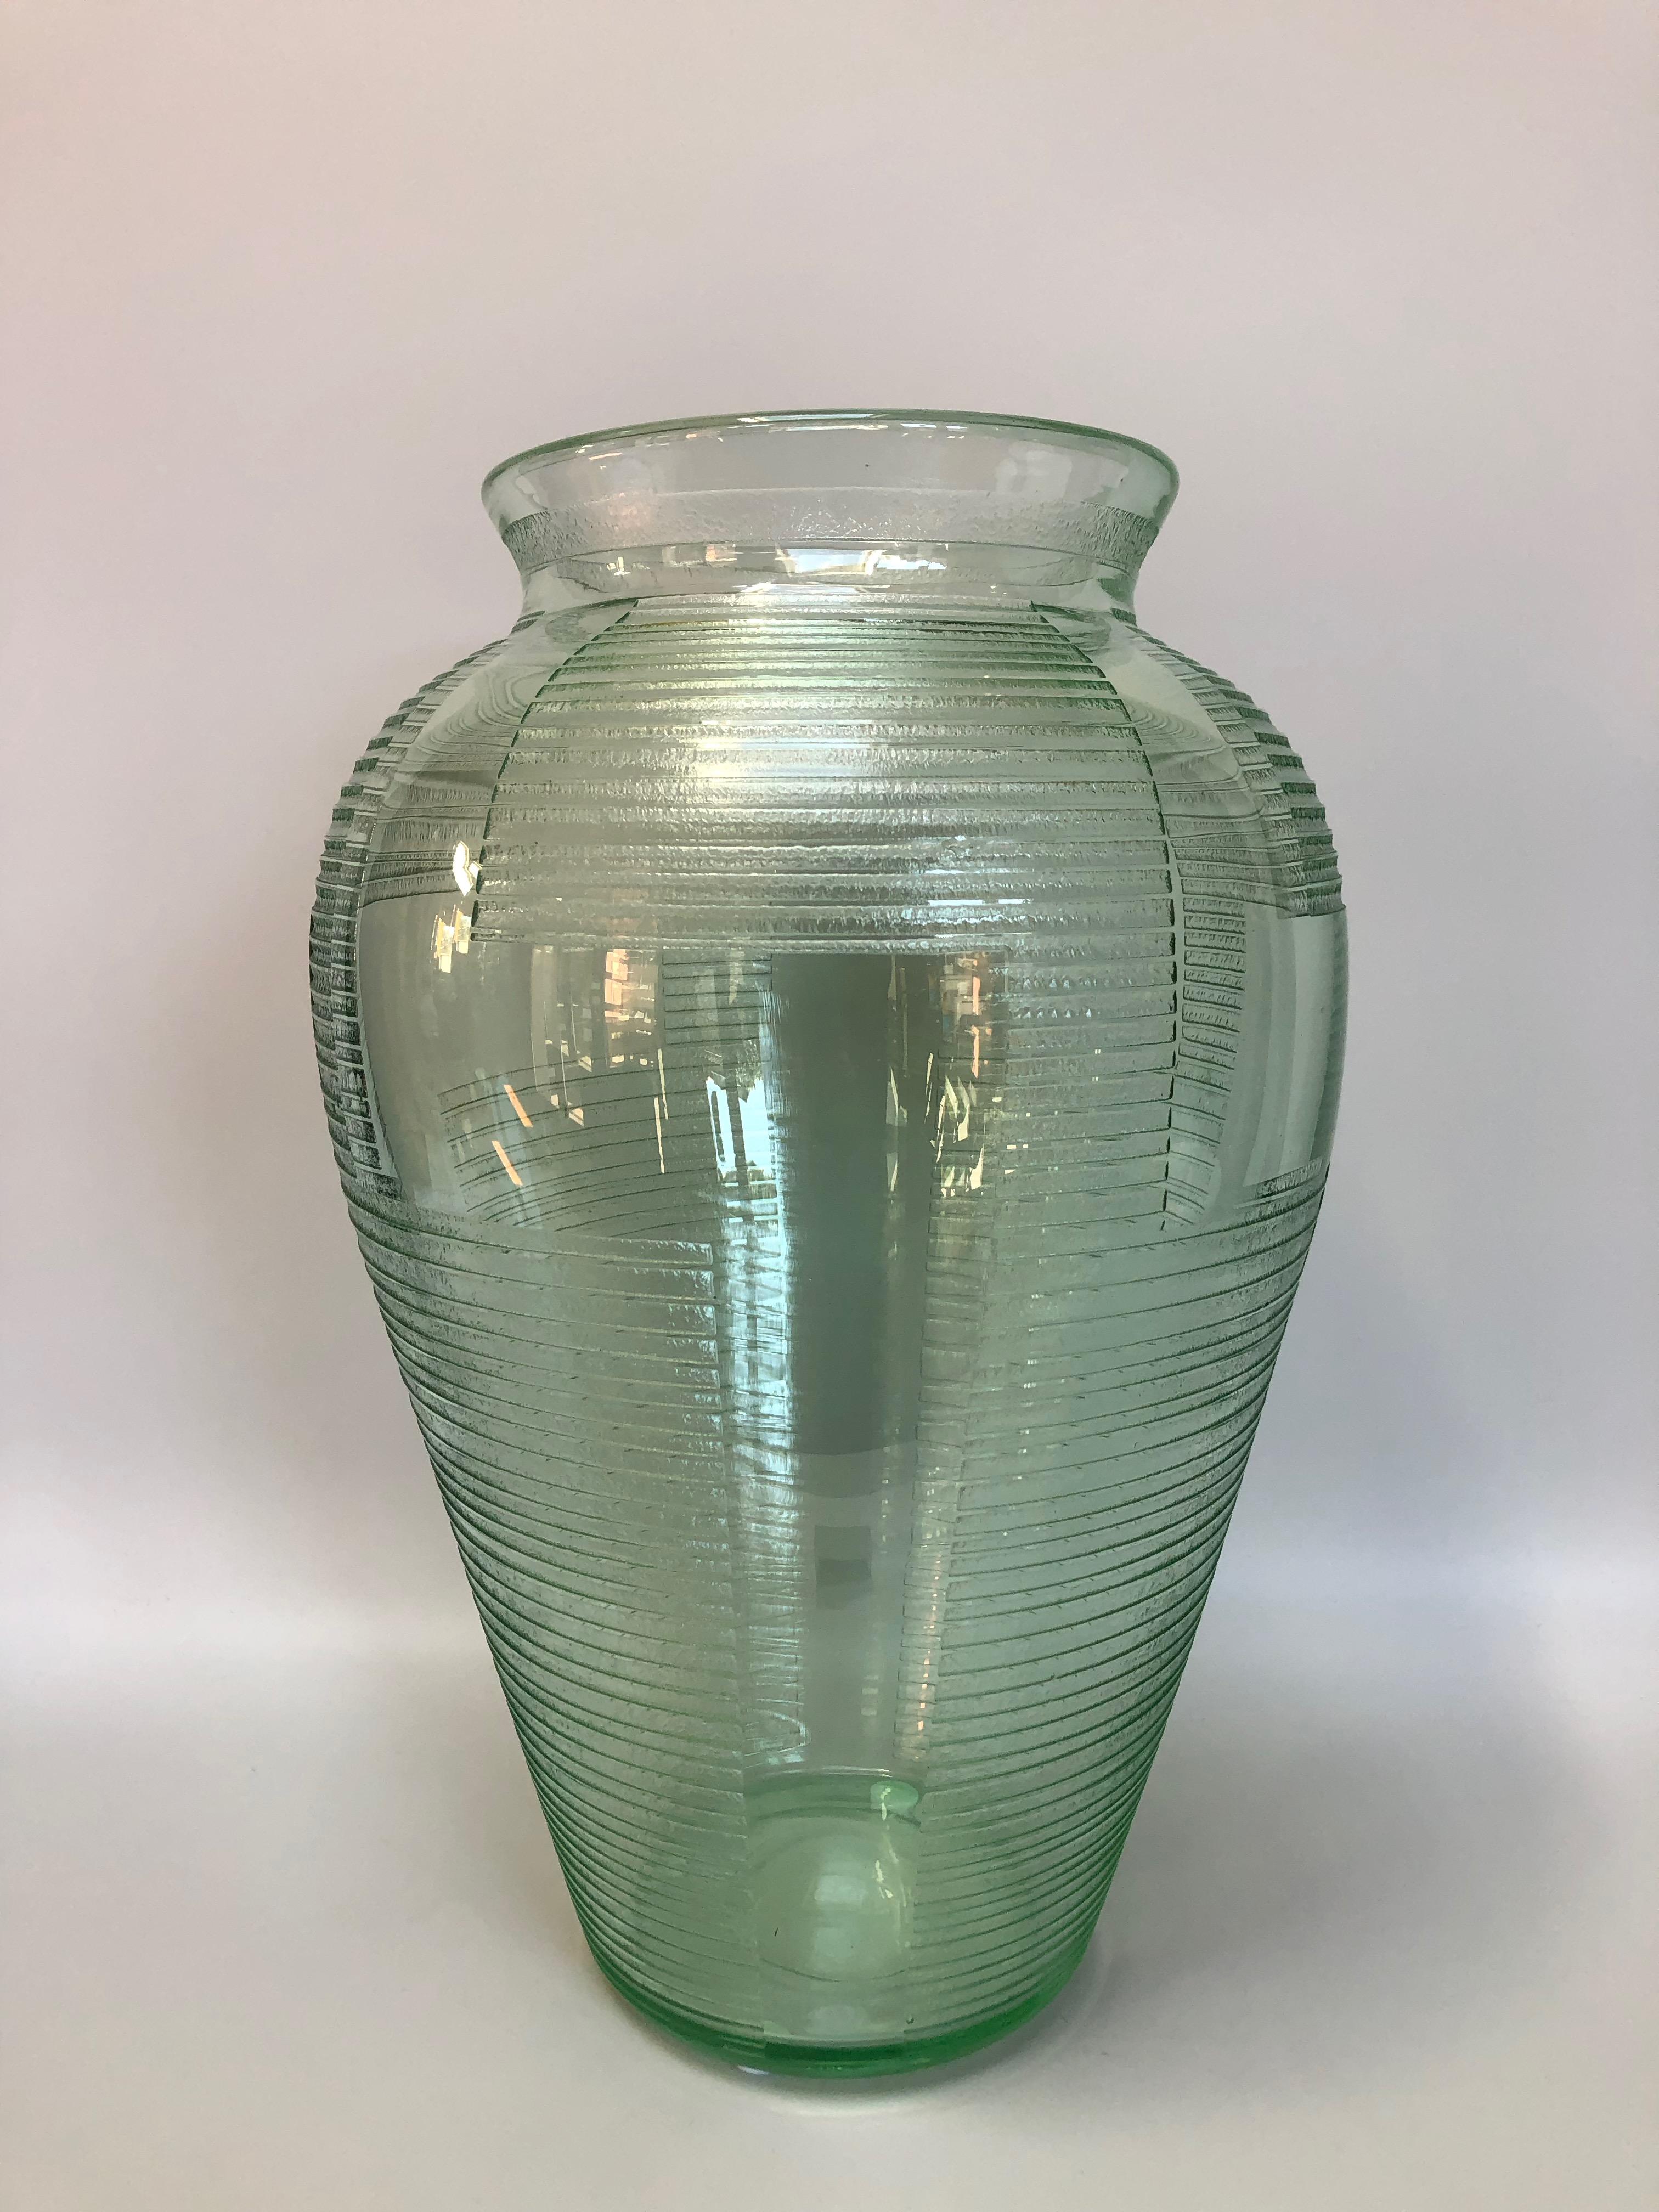 Daum Nancy vase in green color around 1930.
Etched with acid, geometric decoration.
2 Small chips see on the photos (5 and 7).
Total height: 39cm
Base diameter: 14 cm
Collar diameter: 16.8 cm
Weight: 5 Kg

Daum (French establishment created